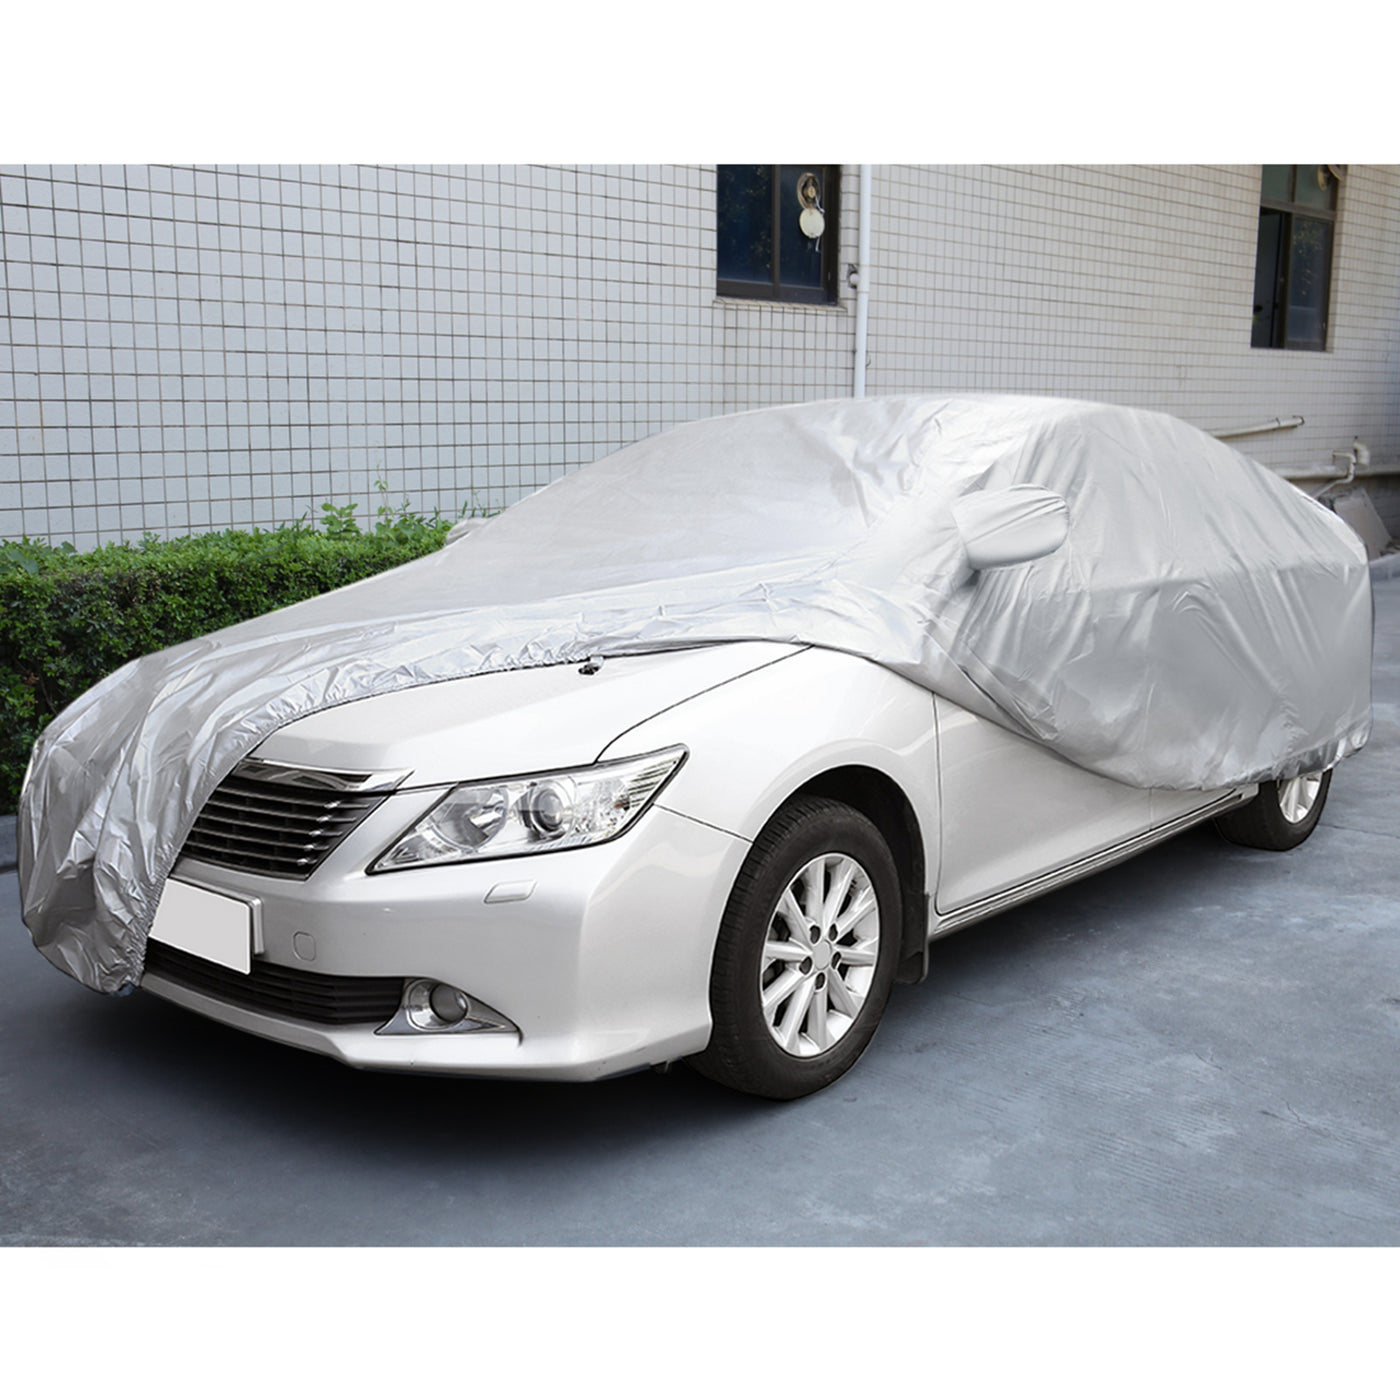 uxcell Uxcell Sedan Car Cover Waterproof Outdoor Sun Rain Resistant Protection for Chevrolet Cruze 4.45M x 1.8M x 1.45M